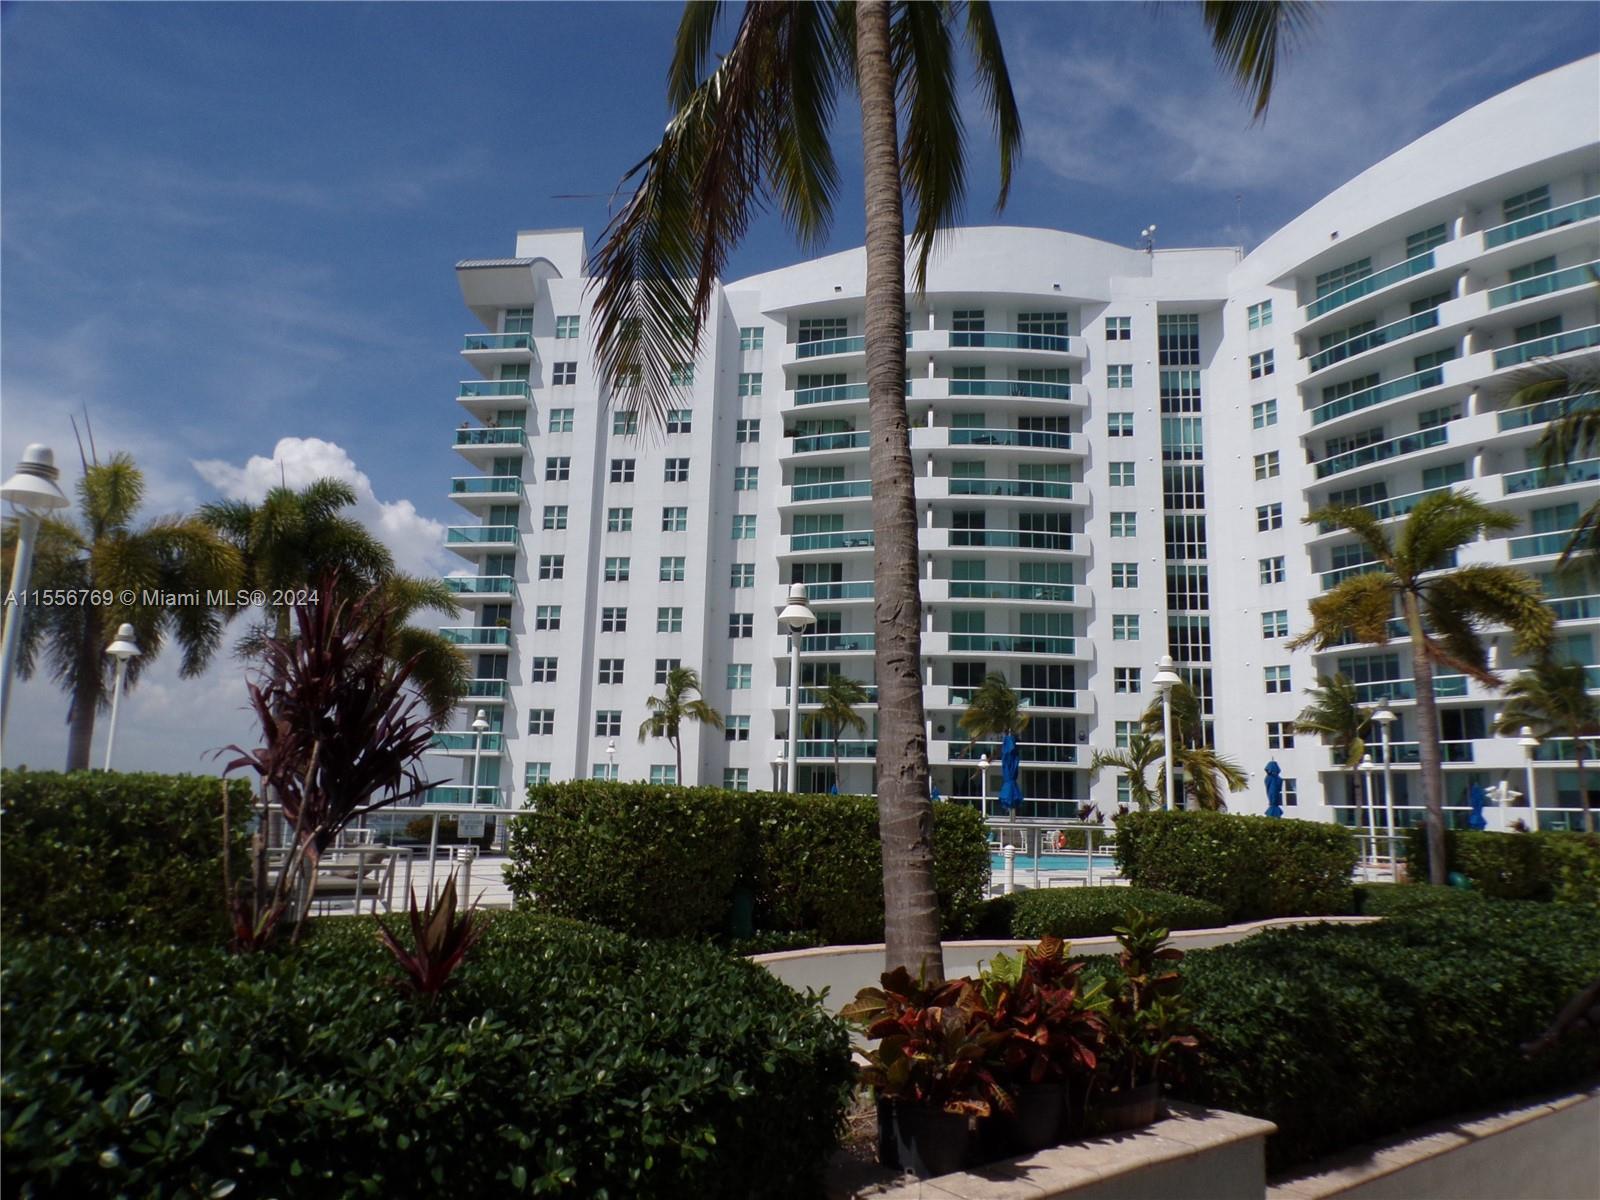 This distinctive apartment is situated on the beautiful island of North Bay Village, boasting excell